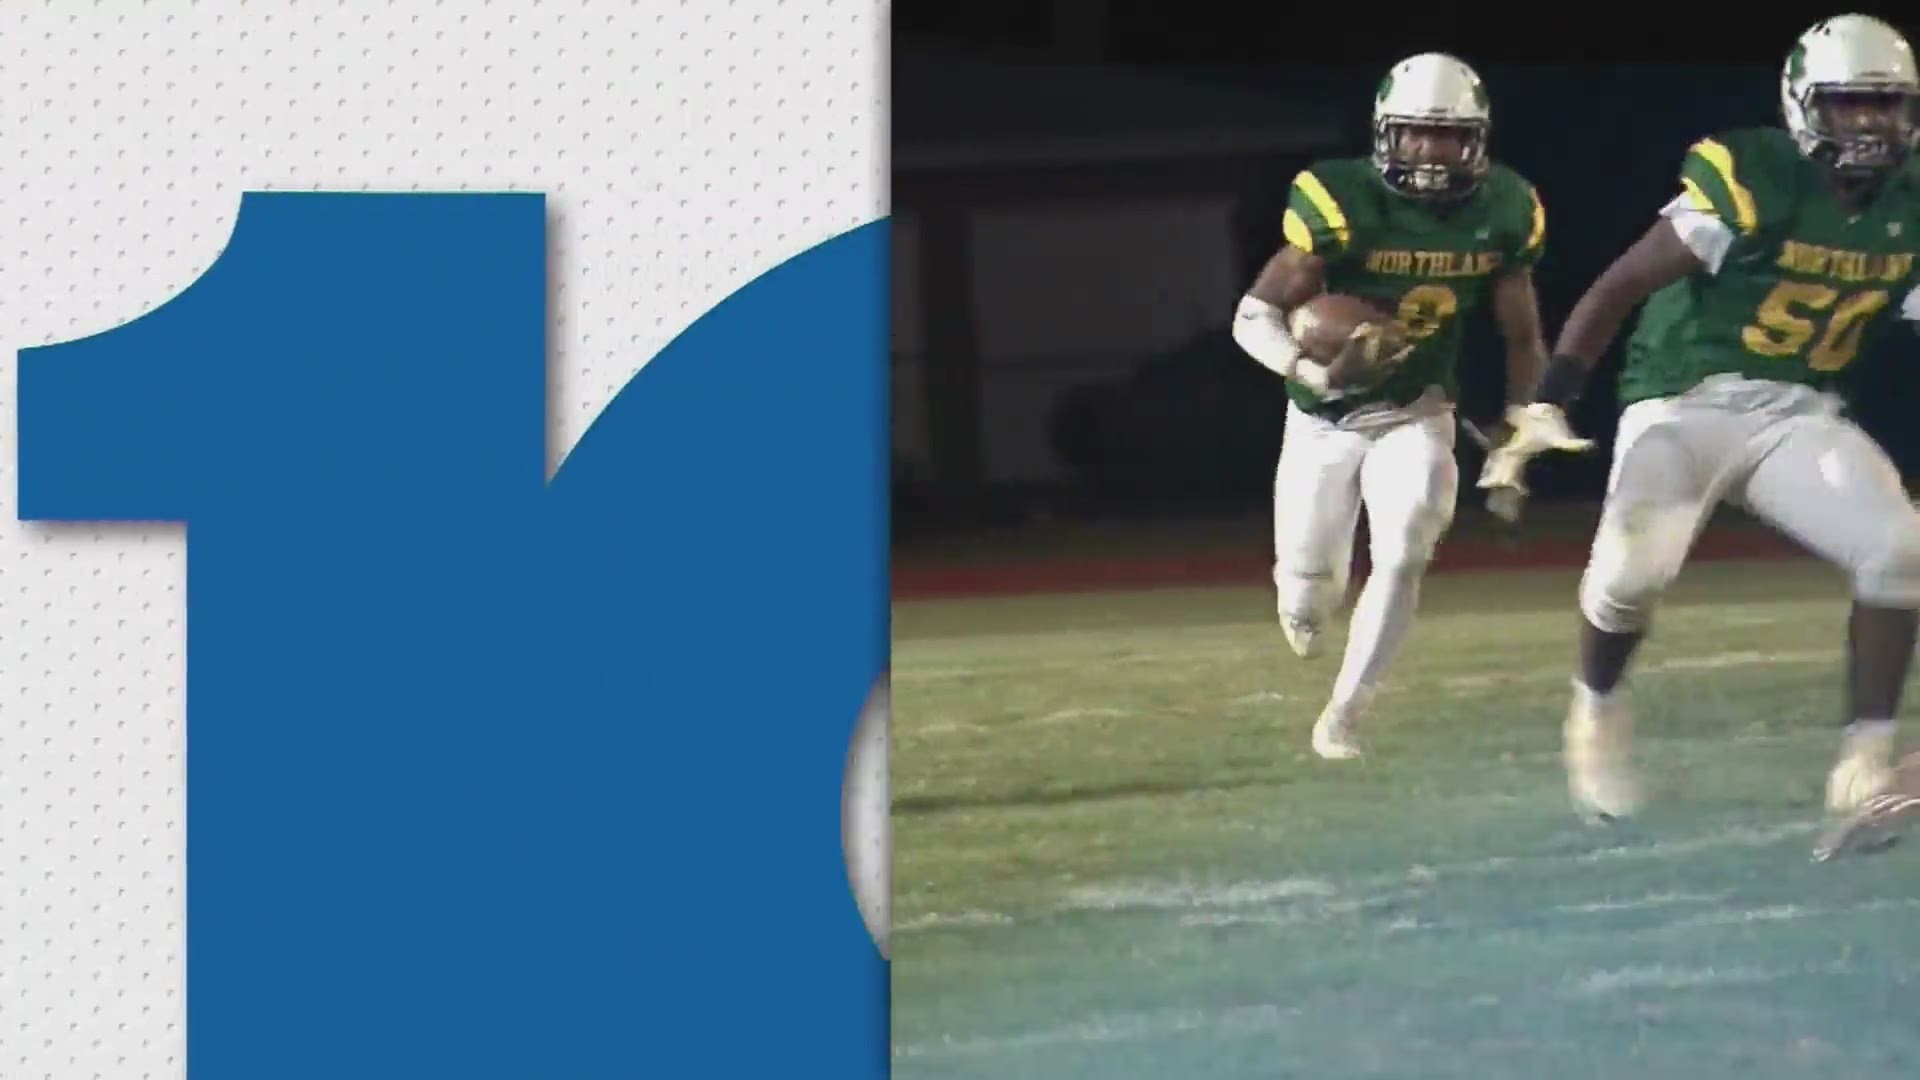 Dom Tiberi and Dave Holmes give you the highlights from Week 3 of high school playoffs